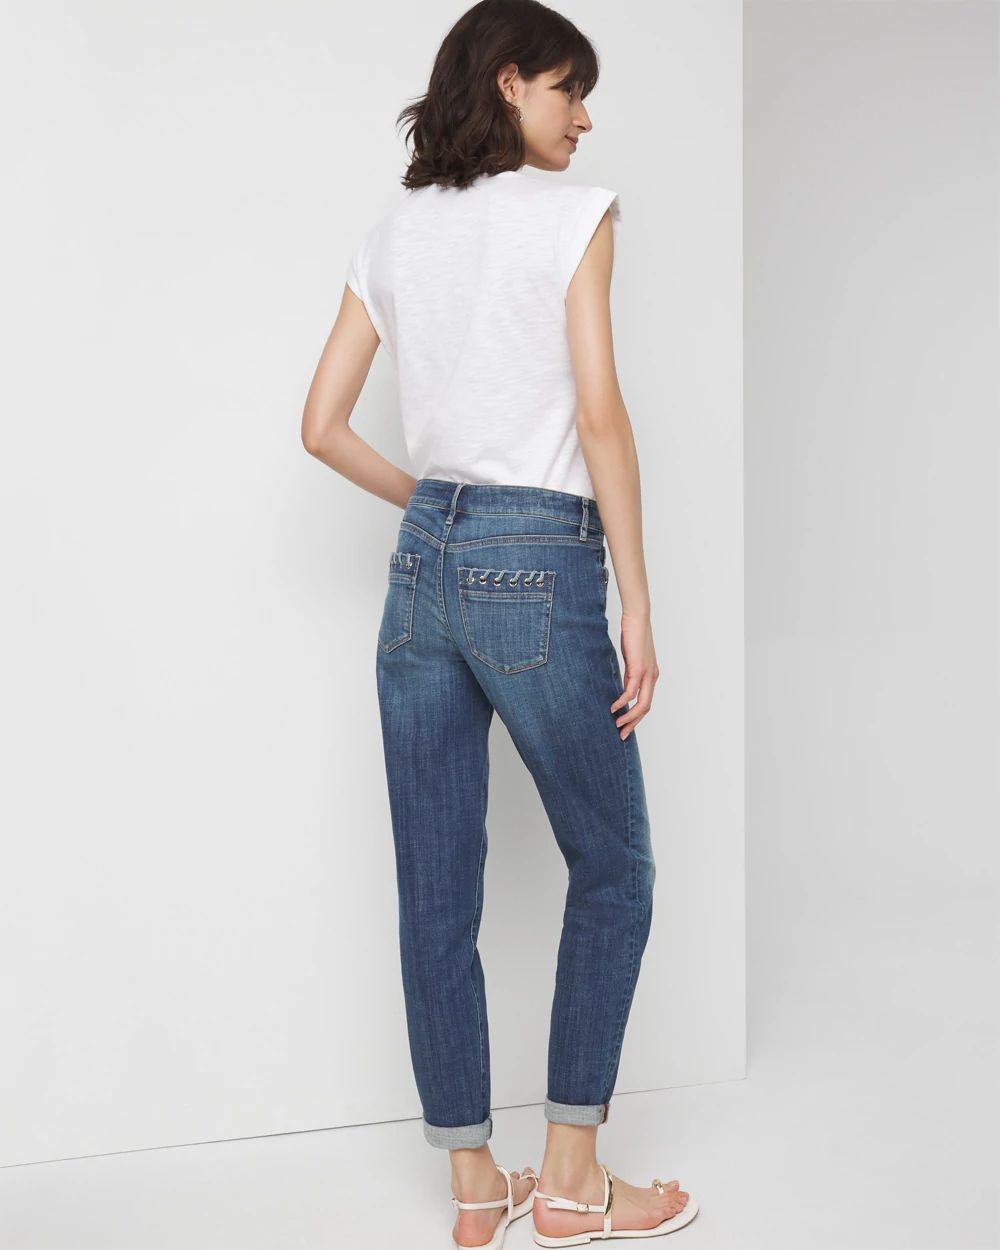 Mid-Rise Everyday Soft Denim  Grommet Girlfriend Jean click to view larger image.